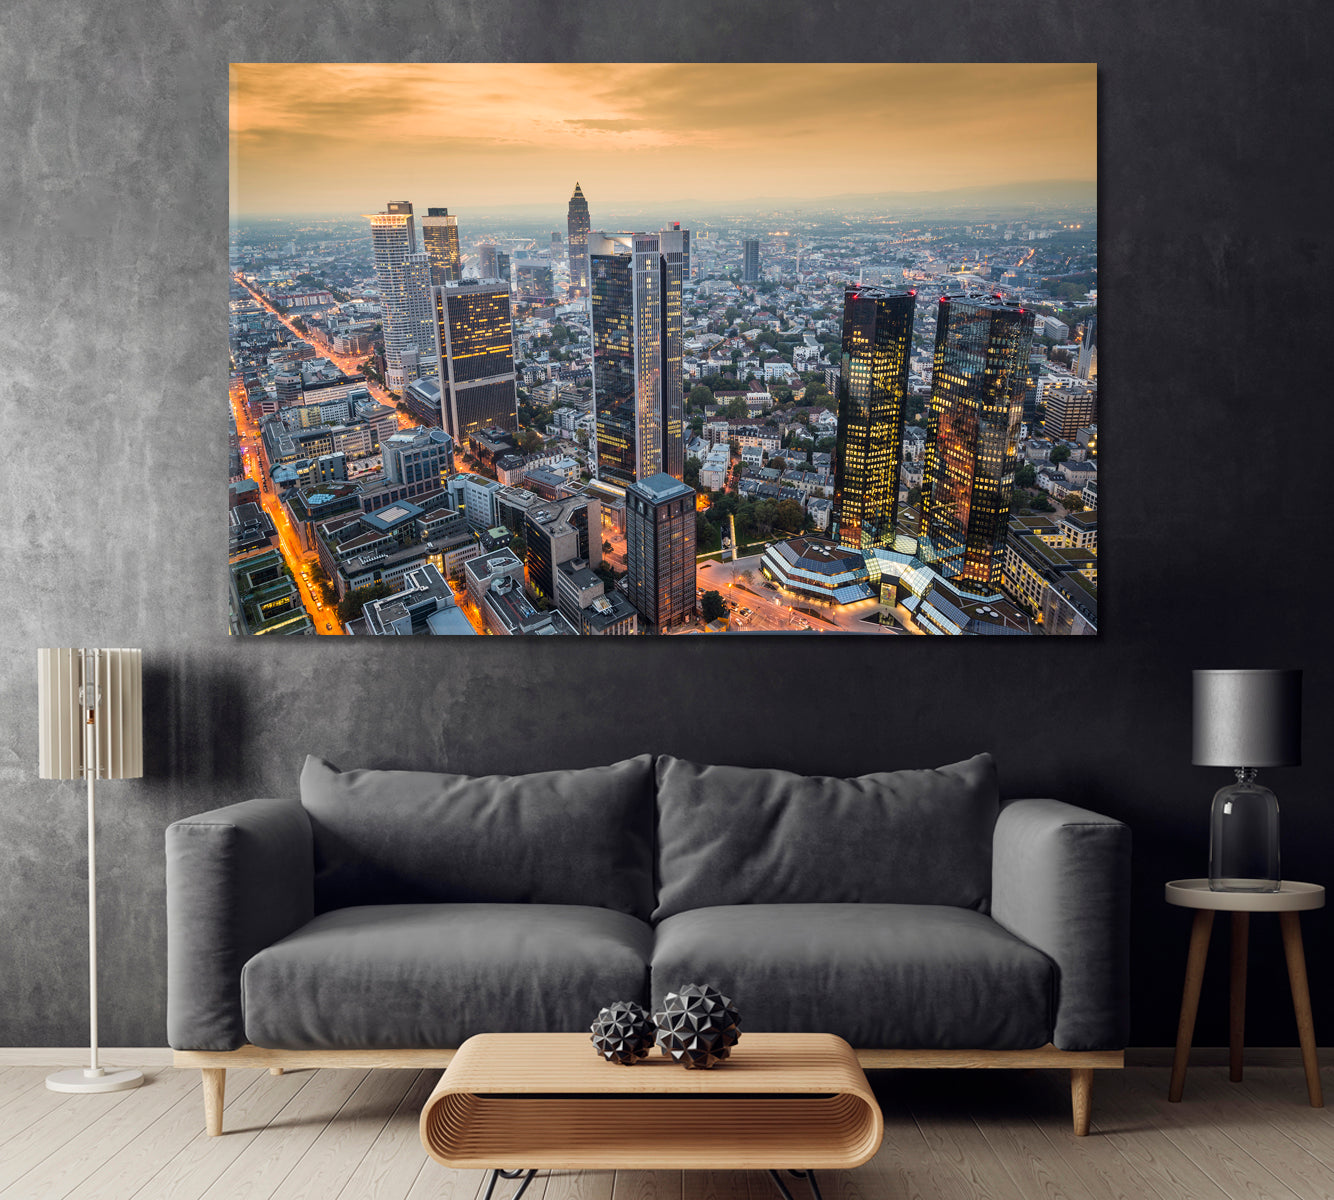 Cityscape of Frankfurt Germany Canvas Print ArtLexy 1 Panel 24"x16" inches 